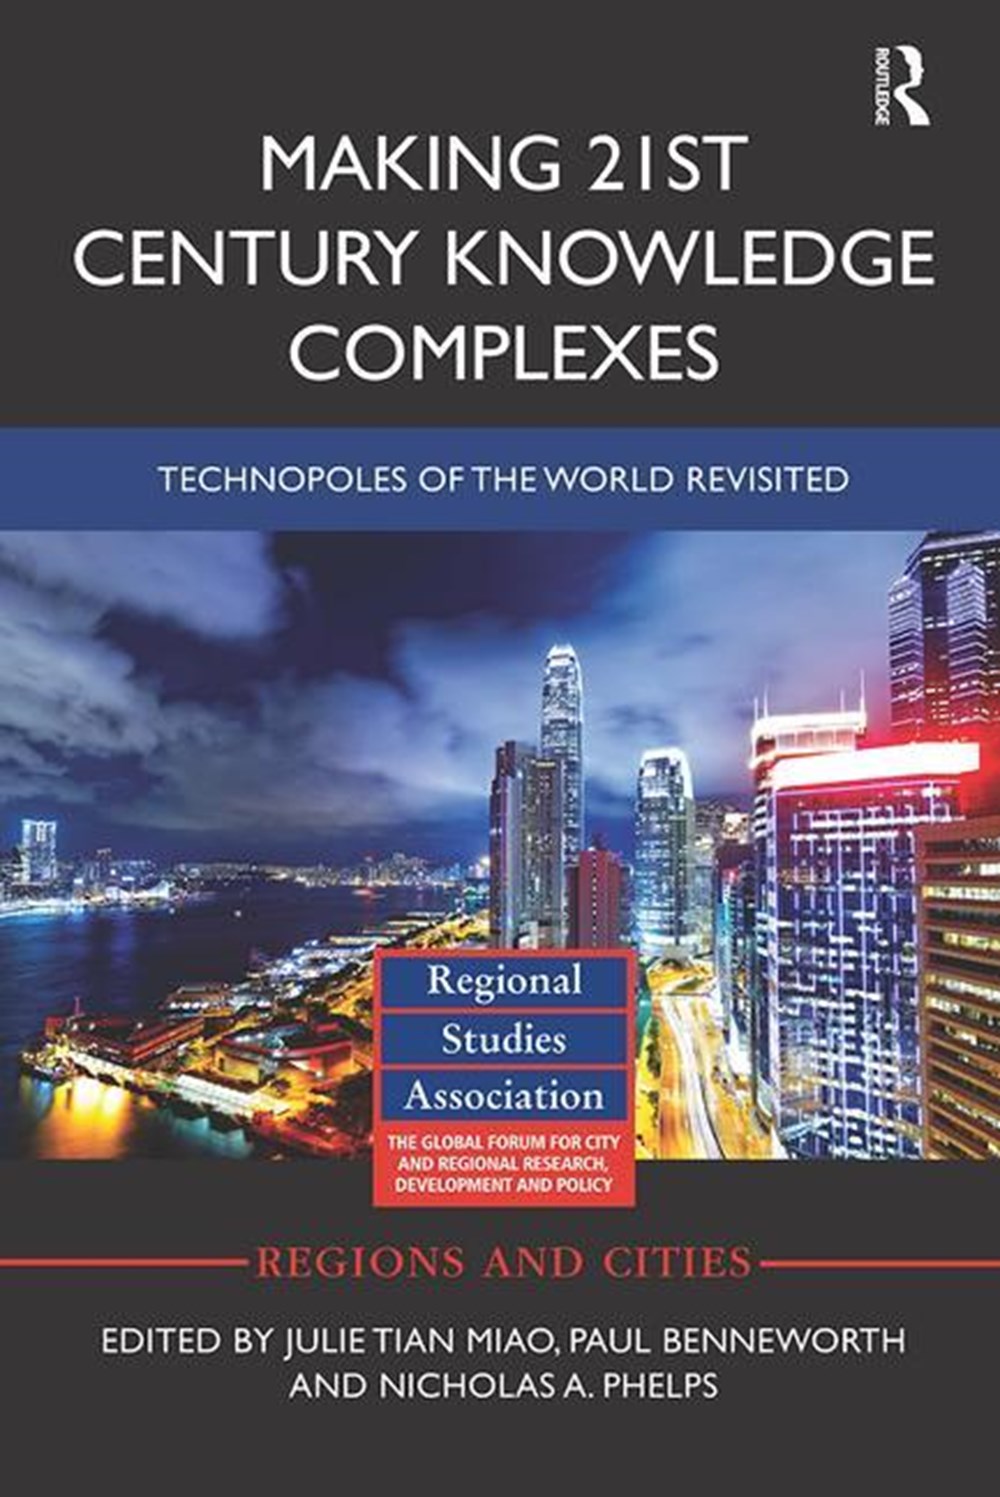 Making 21st Century Knowledge Complexes: Technopoles of the world revisited